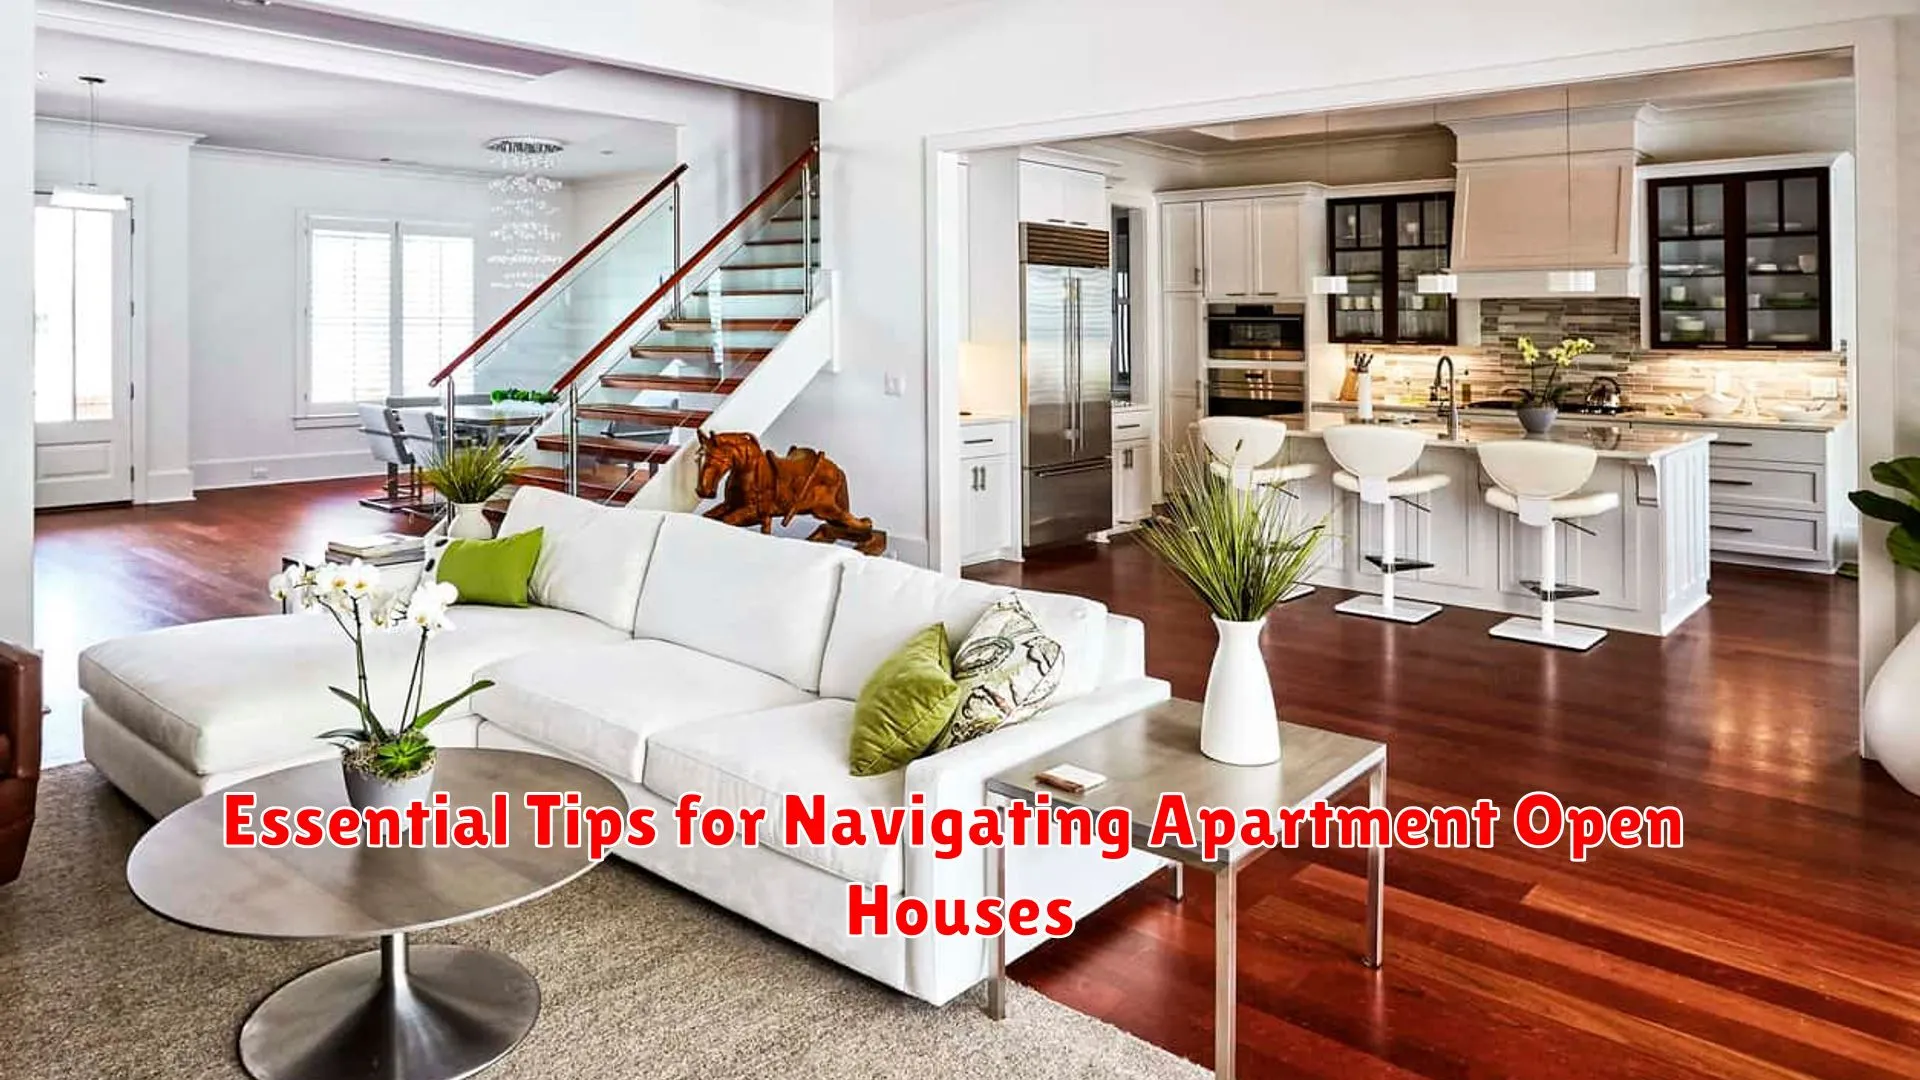 Essential Tips for Navigating Apartment Open Houses